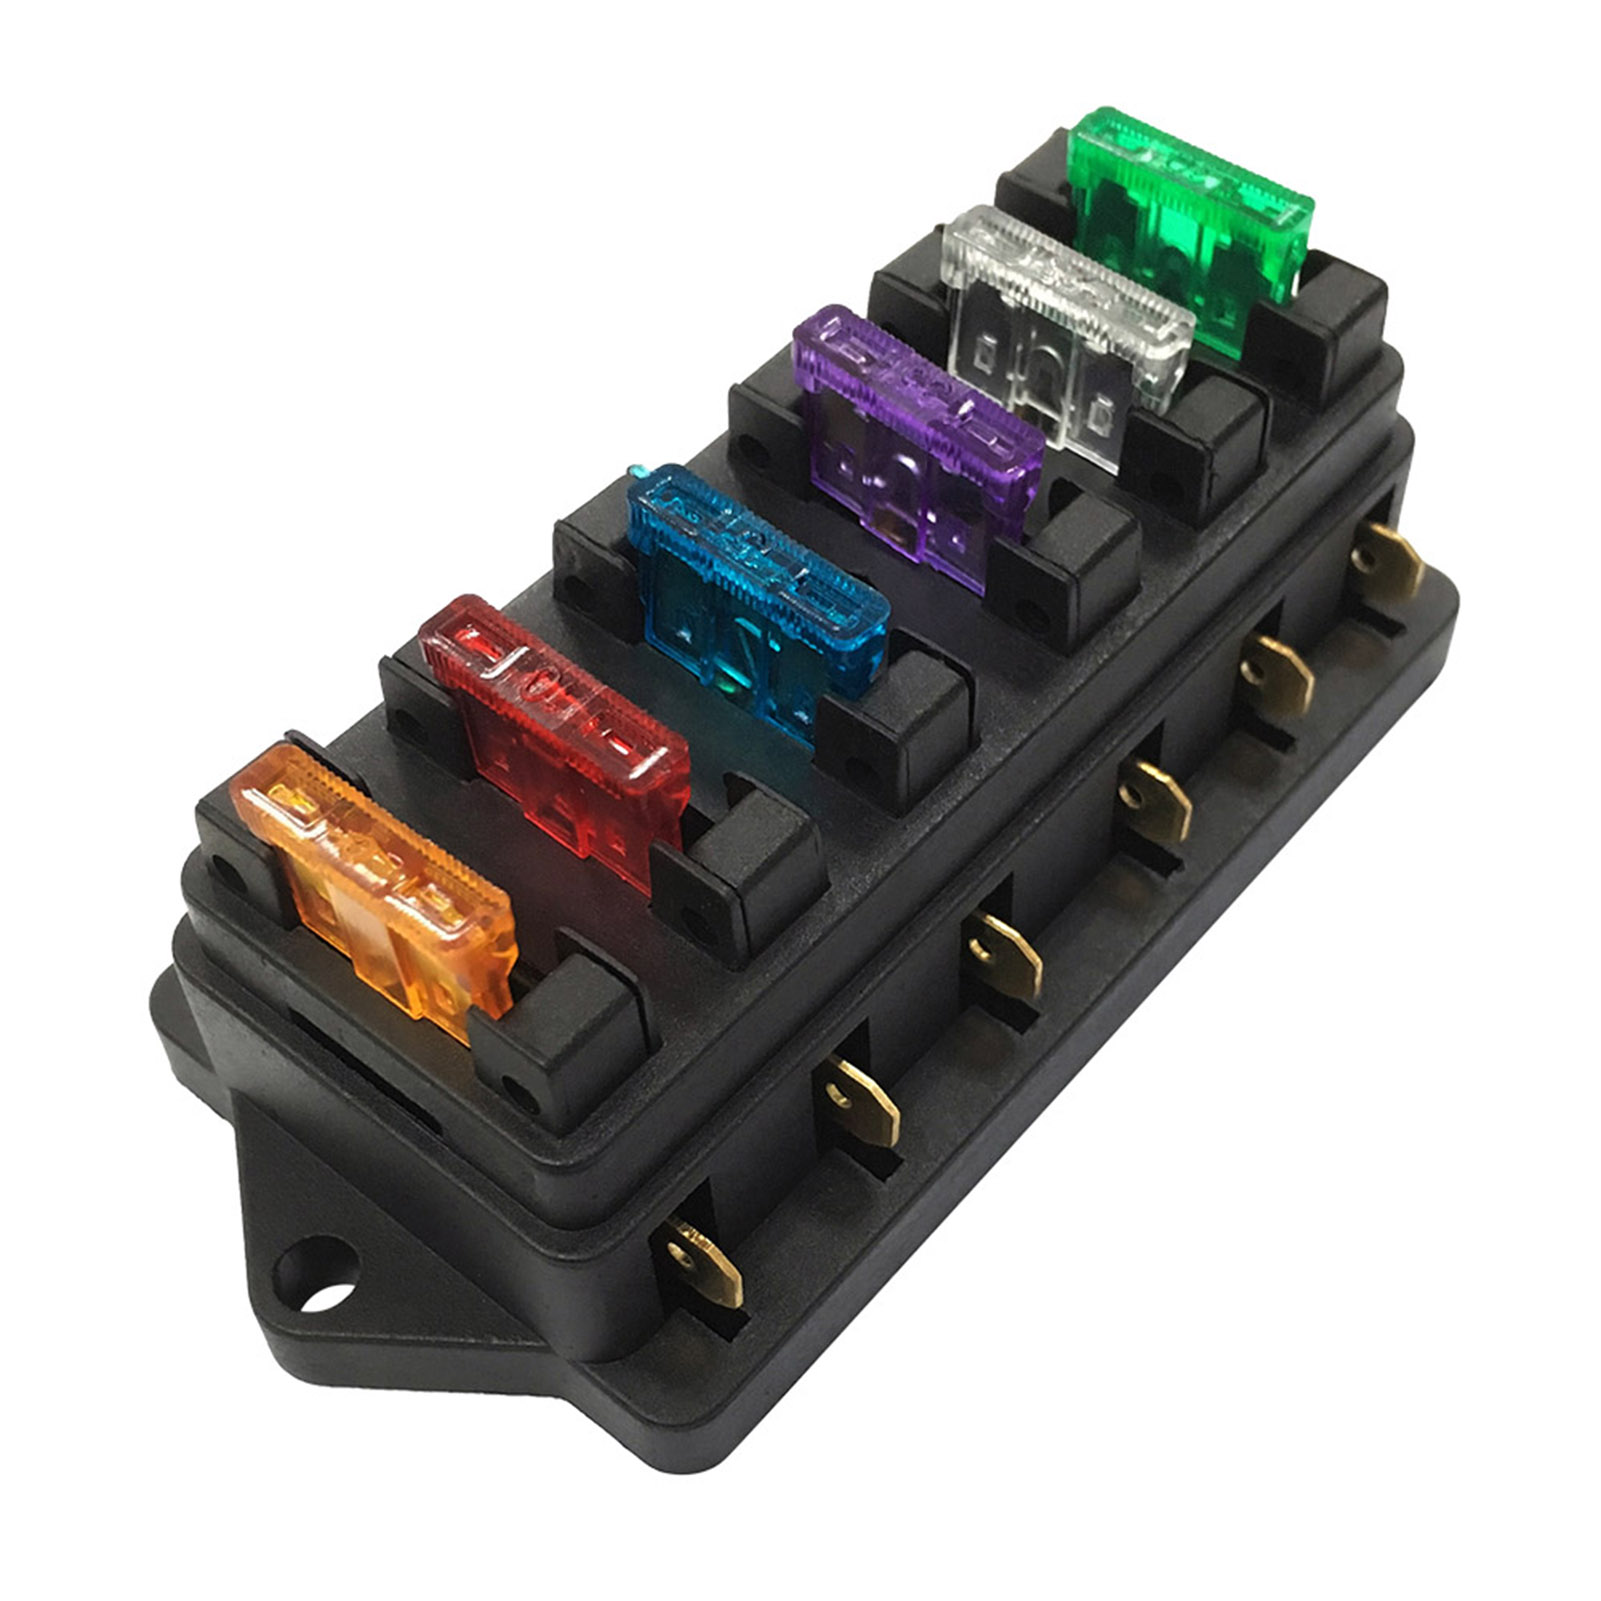 ametoys Way Fuse Holder Box Car Vehicle Automotive Circuit Blade Fuse  Block with Standard Fuses